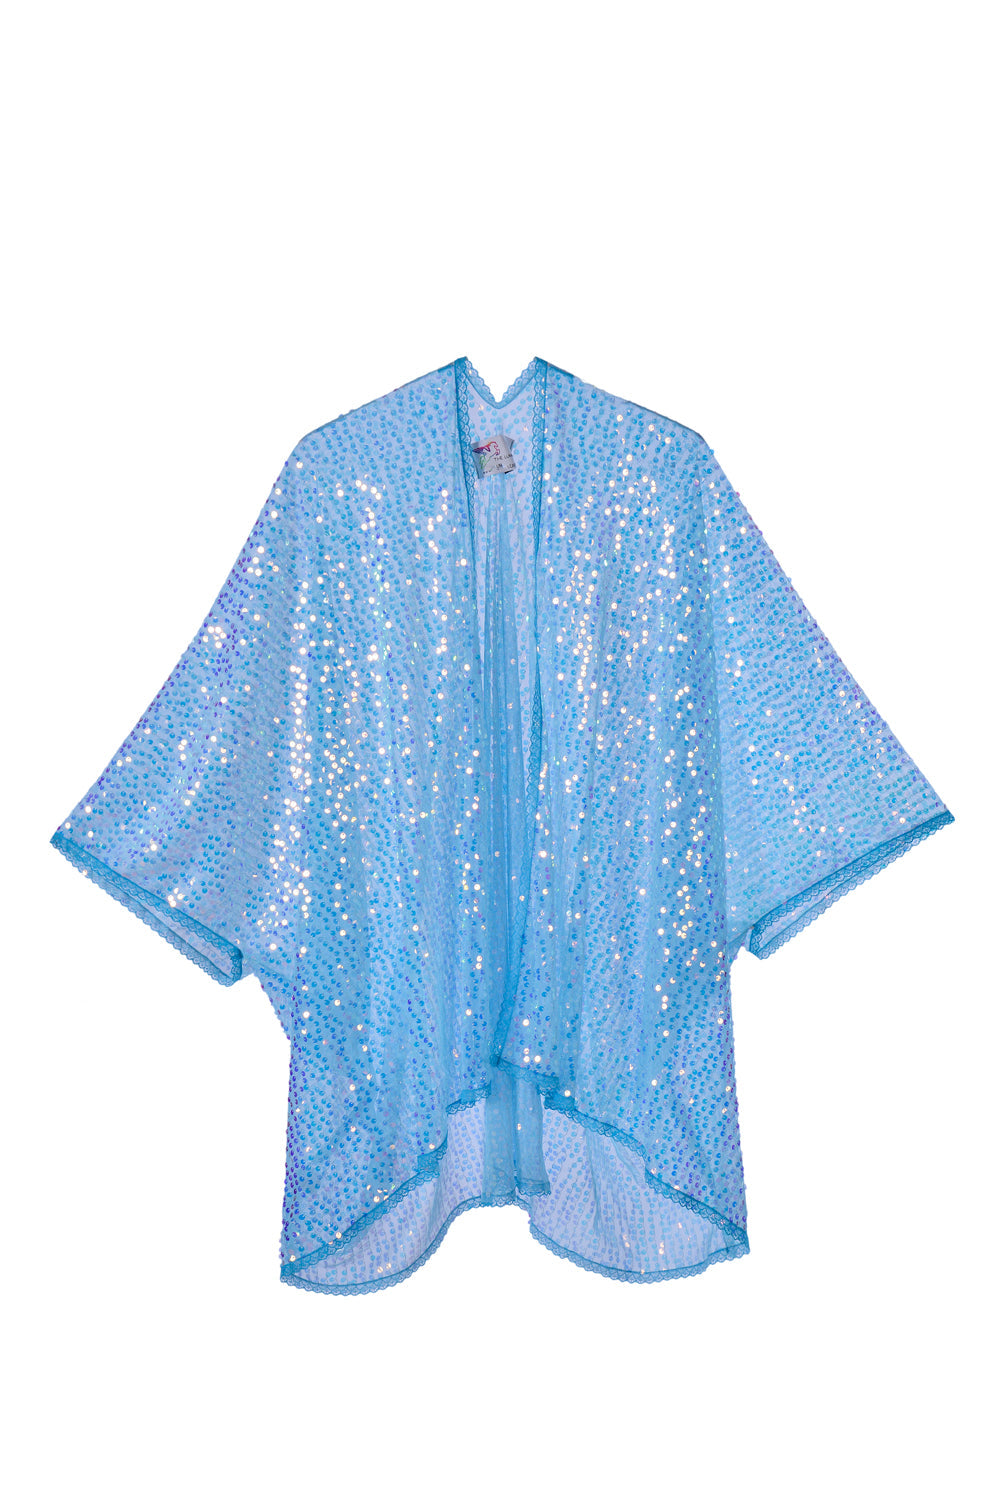 FULL OUTFIT - Blue Butterfly (Top+Bottom+Kimono)